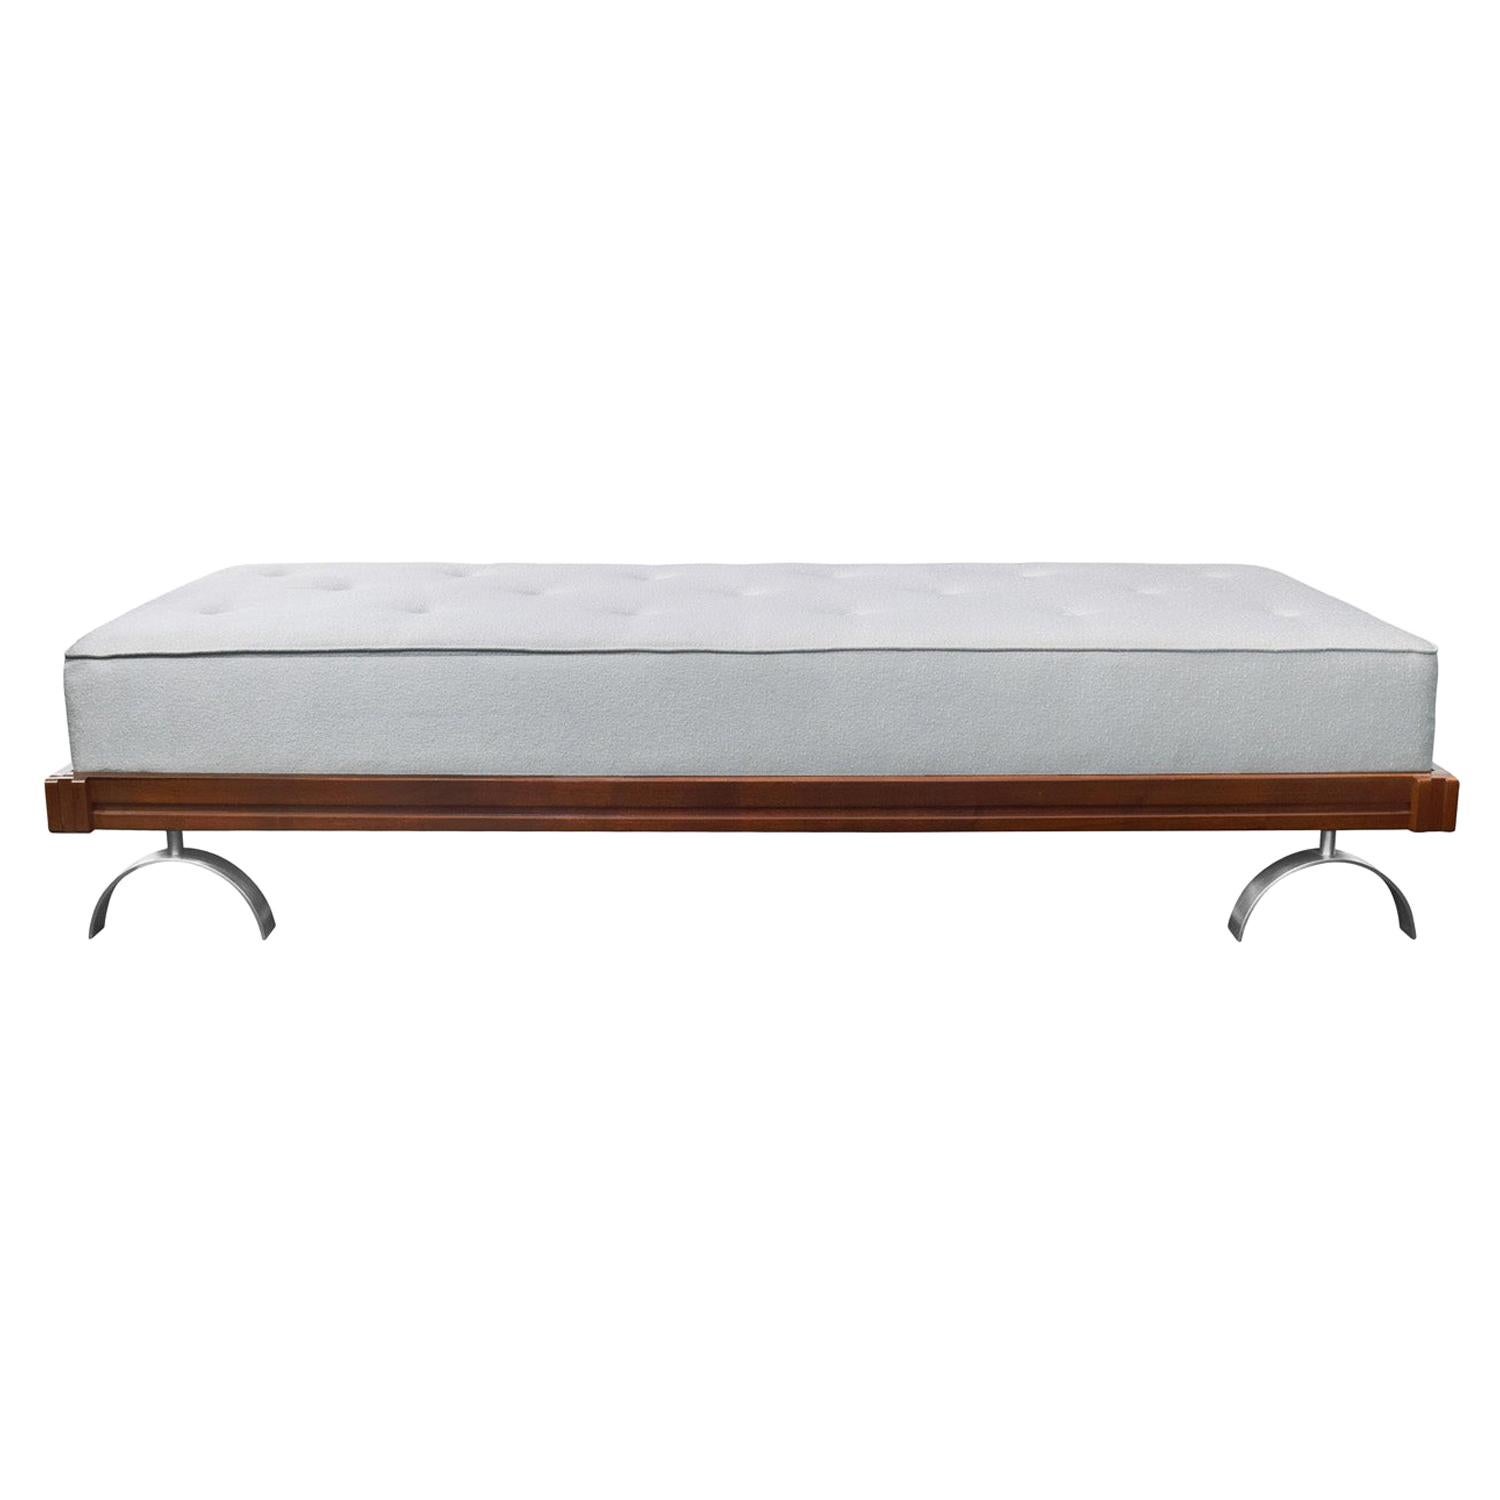 Martin Borenstein Elegant Daybed/Bench with Sculptural Legs, 1950s For Sale